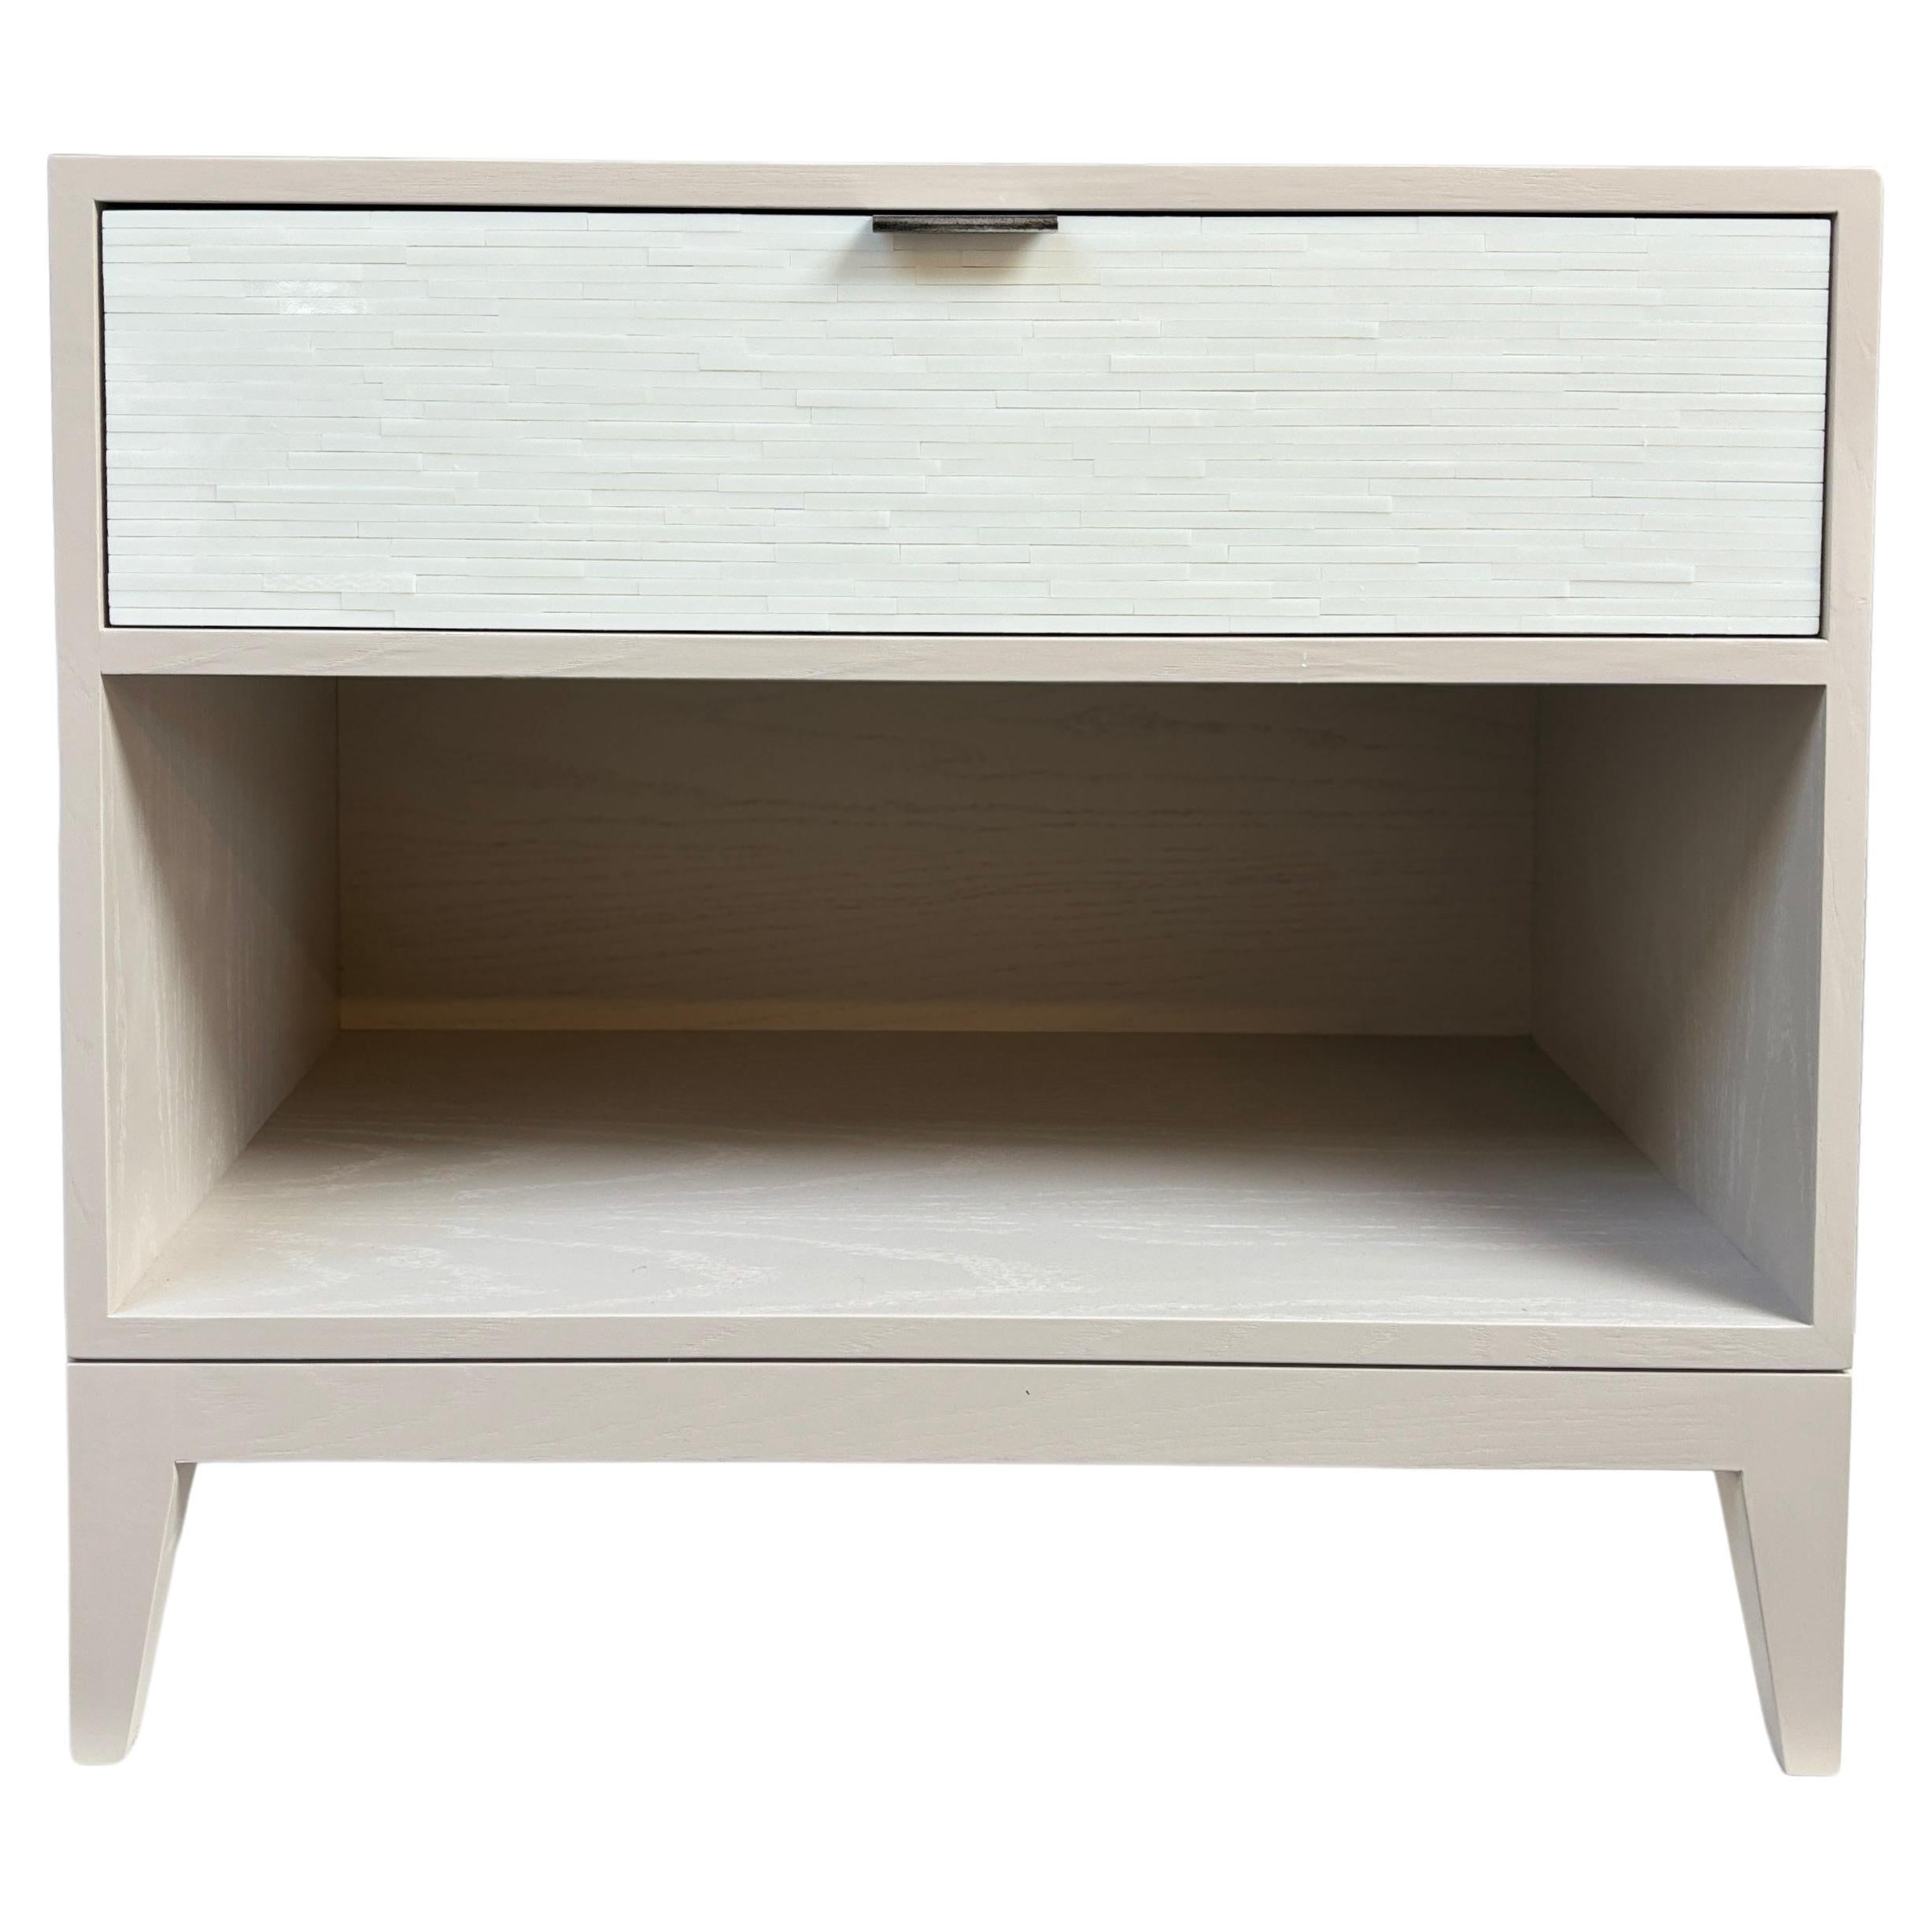 Modern Milano 1-Drawer Nightstand - Misty Grey Lacquer by Ercole Home